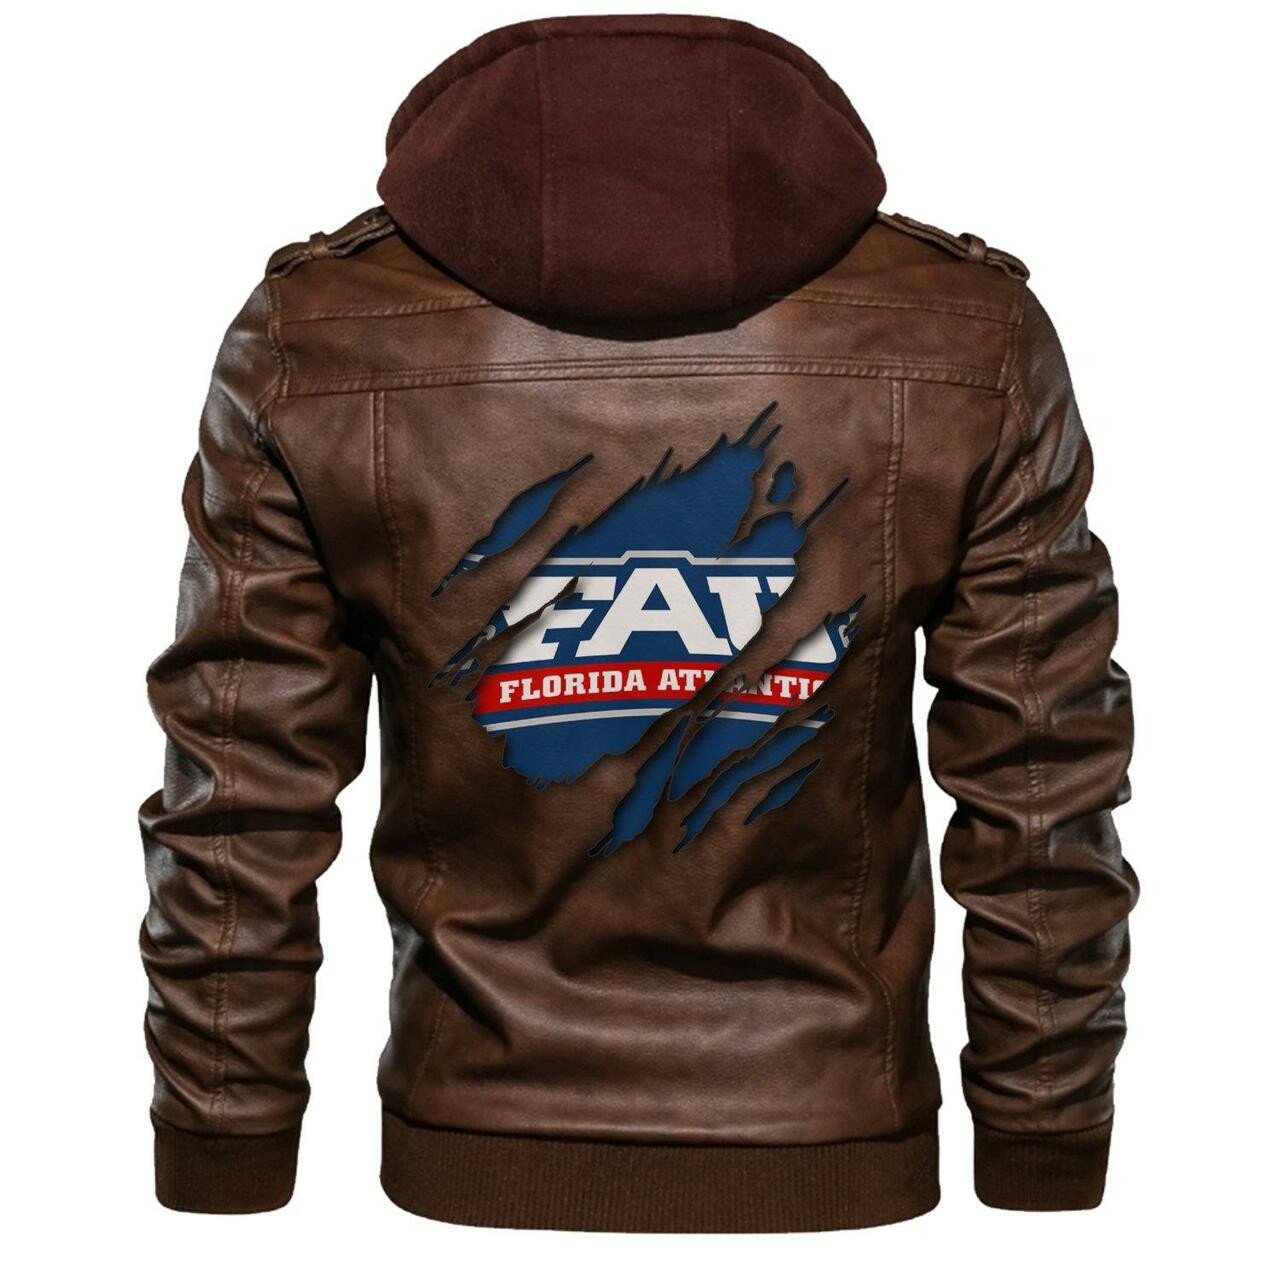 These Amazing Leather Jacket will add to the appeal of your outfit 184